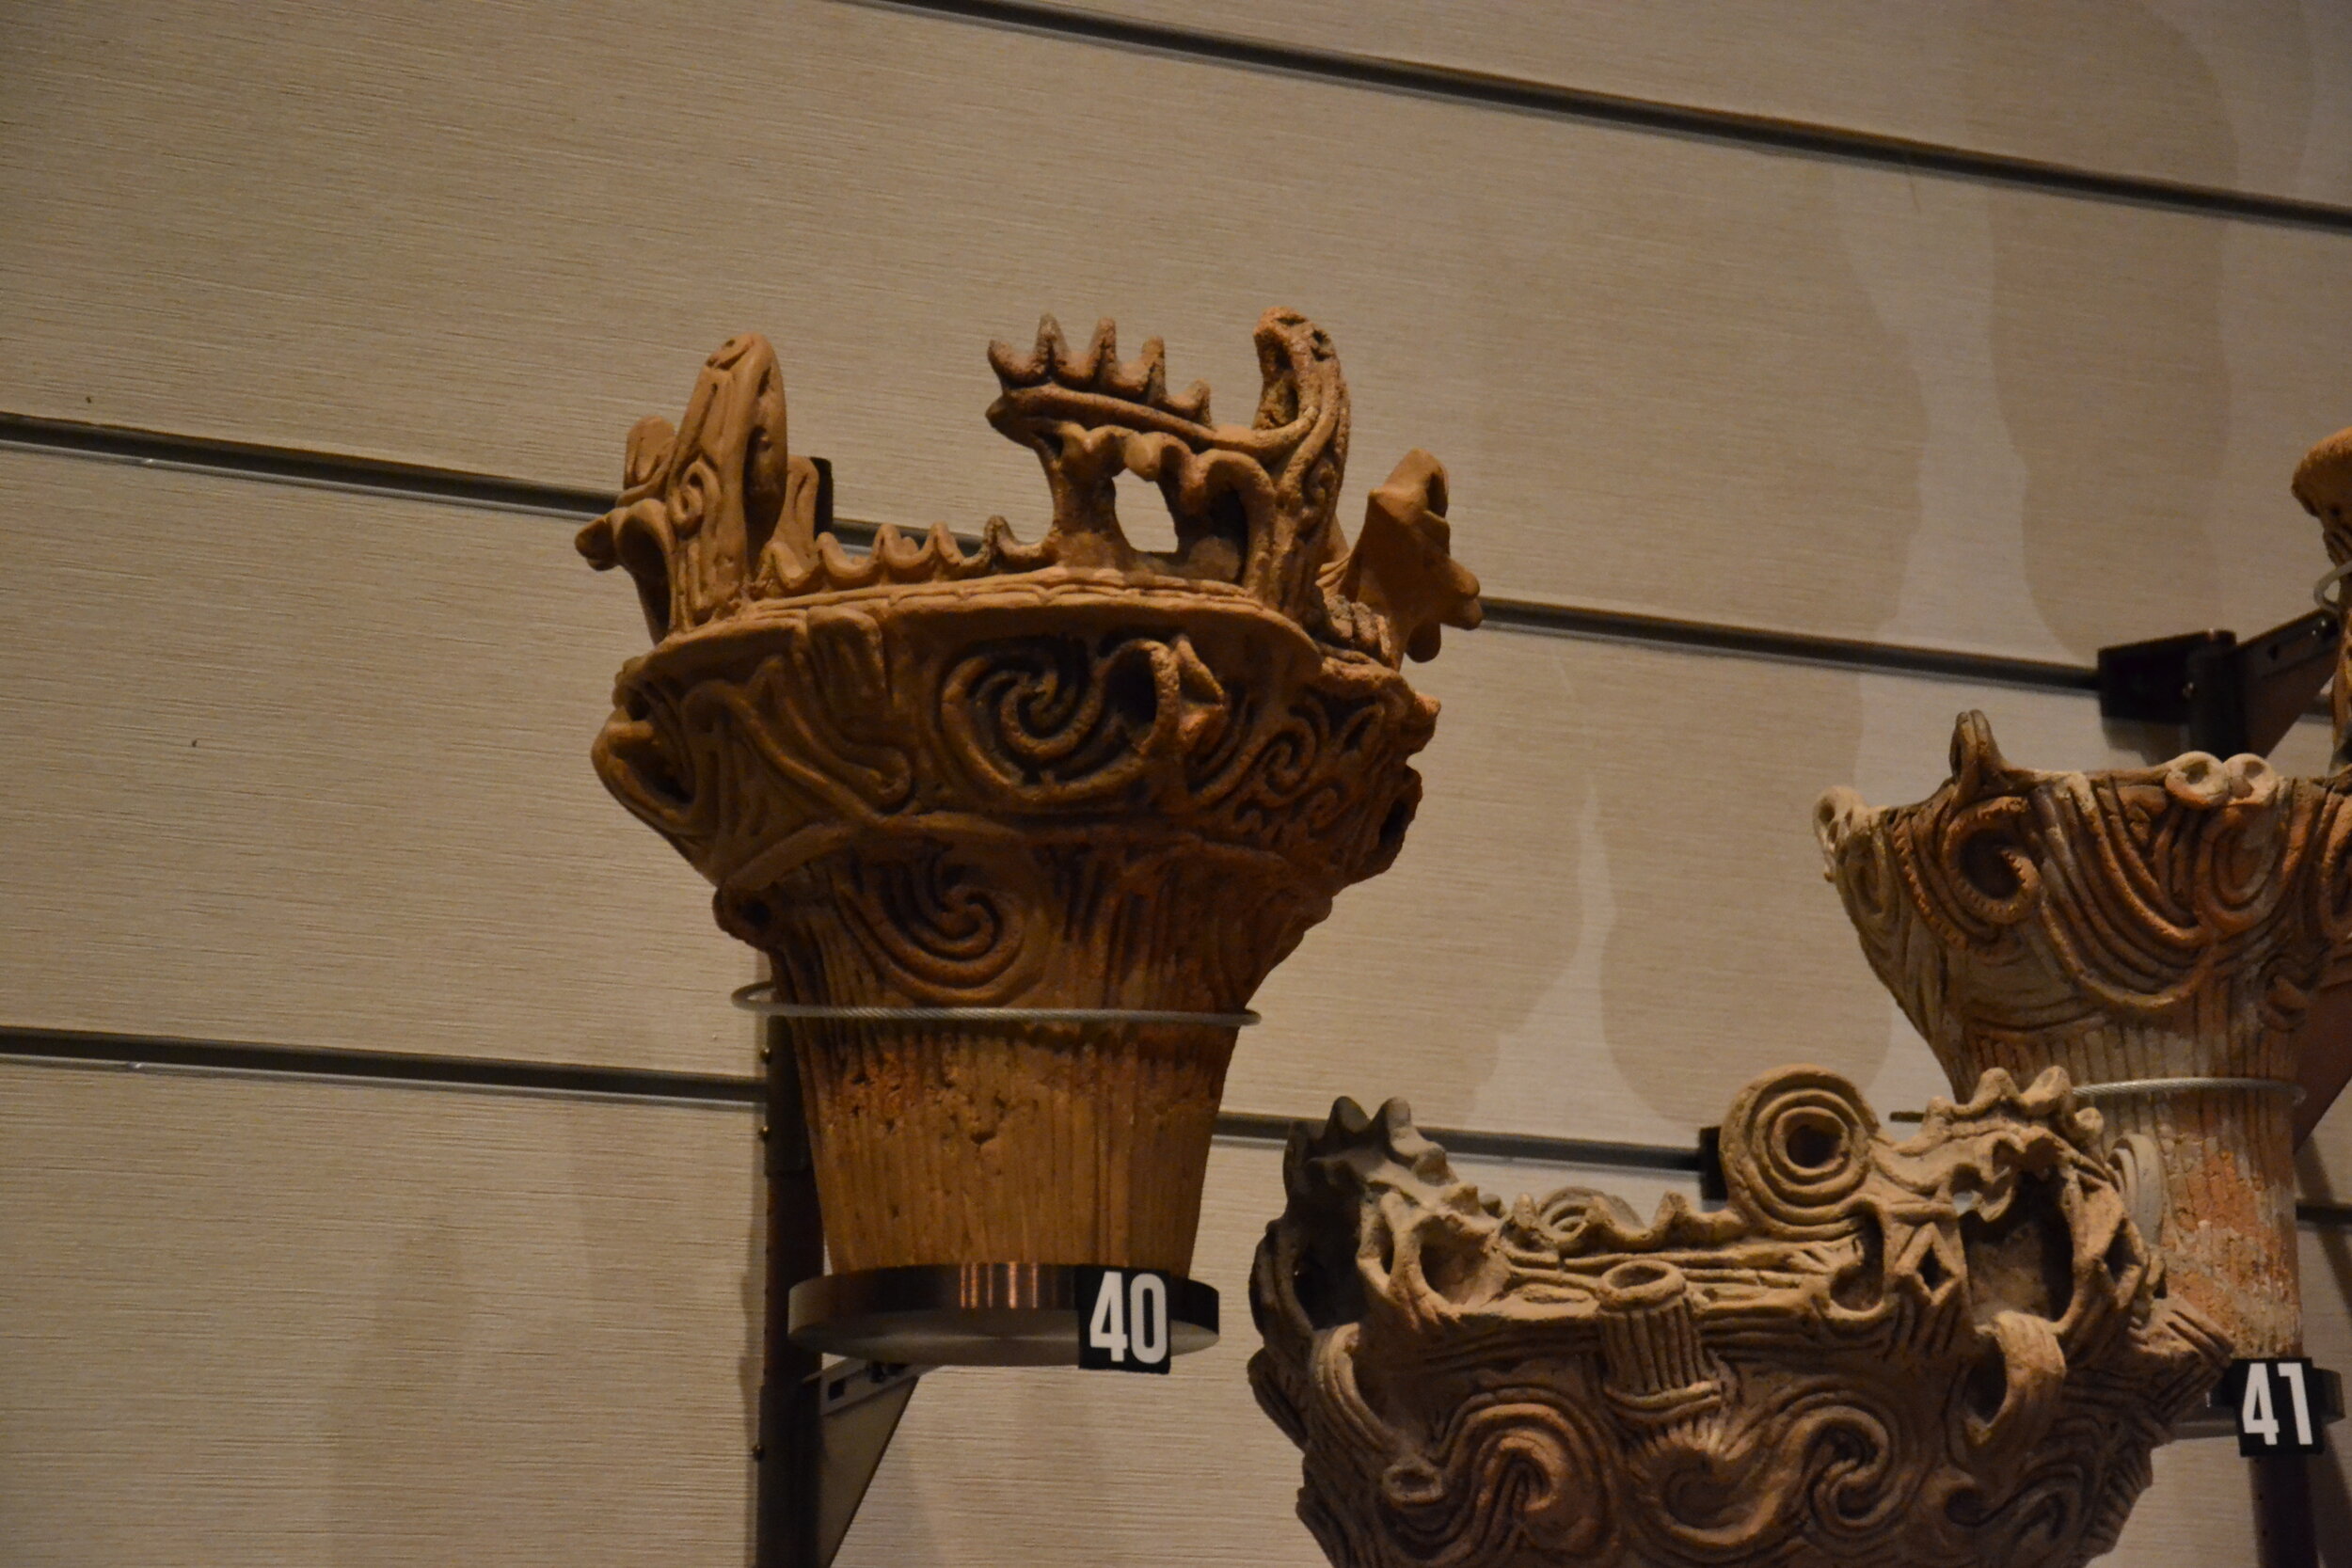  Middle Jomon pottery. Photo by author, taken at the  National Museum of Japanese History  in Sakura, Japan 